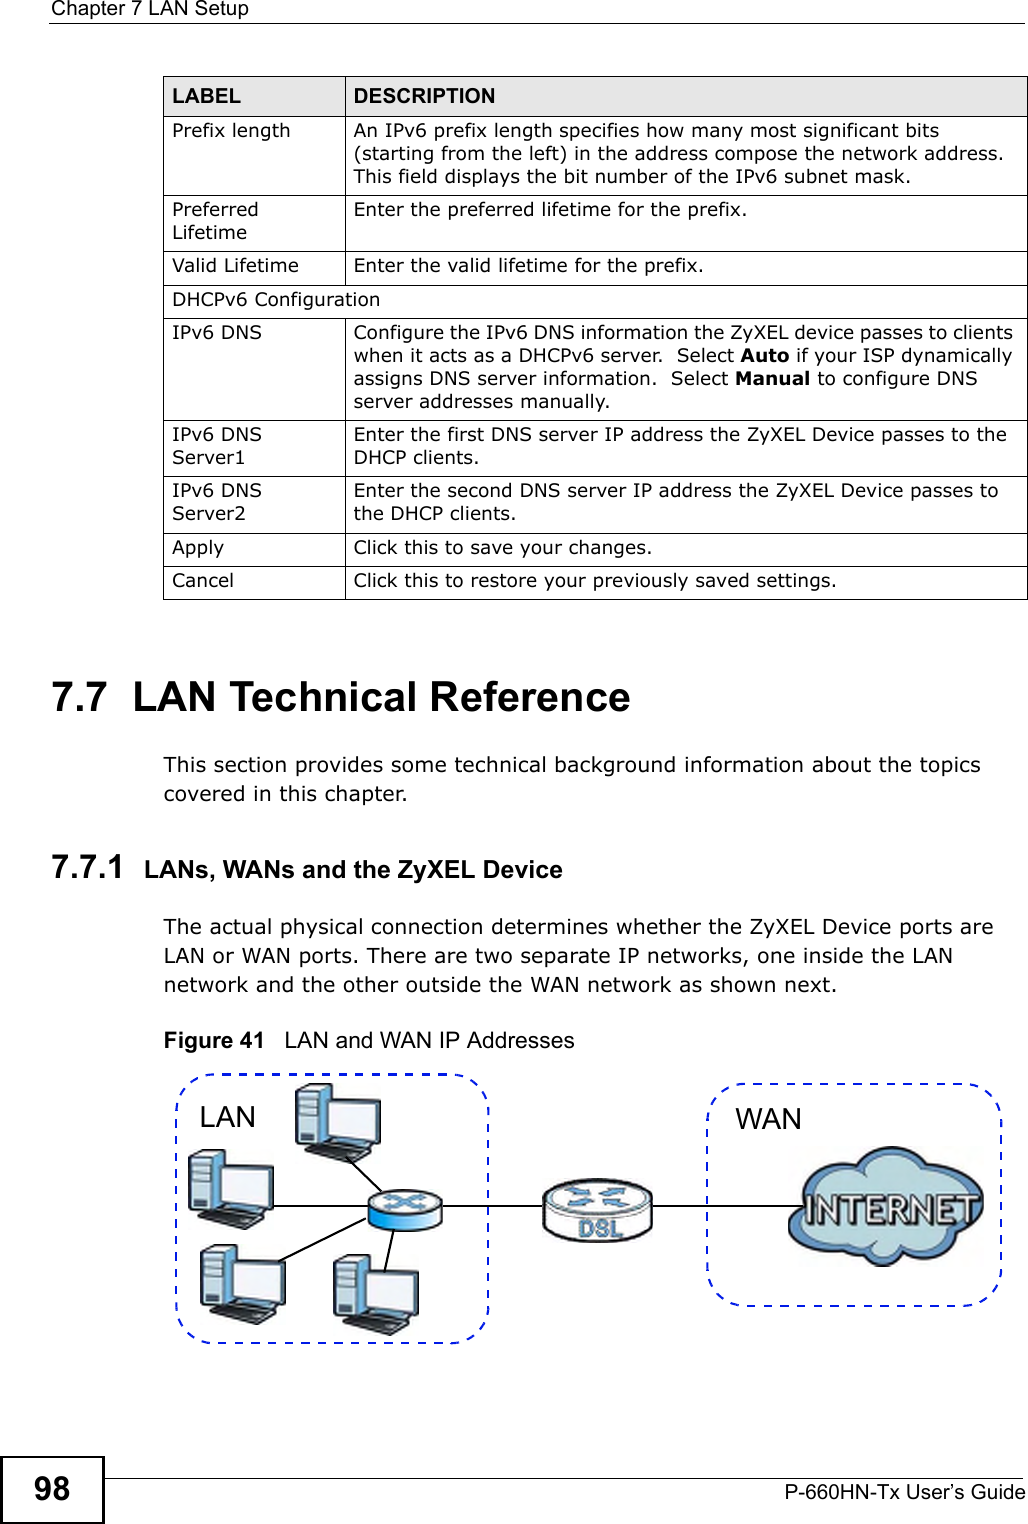 Chapter 7 LAN SetupP-660HN-Tx User’s Guide987.7  LAN Technical ReferenceThis section provides some technical background information about the topics covered in this chapter.7.7.1  LANs, WANs and the ZyXEL DeviceThe actual physical connection determines whether the ZyXEL Device ports are LAN or WAN ports. There are two separate IP networks, one inside the LAN network and the other outside the WAN network as shown next.Figure 41   LAN and WAN IP AddressesPrefix length An IPv6 prefix length specifies how many most significant bits (starting from the left) in the address compose the network address.  This field displays the bit number of the IPv6 subnet mask.Preferred LifetimeEnter the preferred lifetime for the prefix.Valid Lifetime Enter the valid lifetime for the prefix.DHCPv6 Configuration IPv6 DNS Configure the IPv6 DNS information the ZyXEL device passes to clients when it acts as a DHCPv6 server.  Select Auto if your ISP dynamically assigns DNS server information.  Select Manual to configure DNS server addresses manually.IPv6 DNS Server1Enter the first DNS server IP address the ZyXEL Device passes to the DHCP clients.IPv6 DNS Server2Enter the second DNS server IP address the ZyXEL Device passes to the DHCP clients.Apply Click this to save your changes.Cancel Click this to restore your previously saved settings.LABEL DESCRIPTIONWANLAN